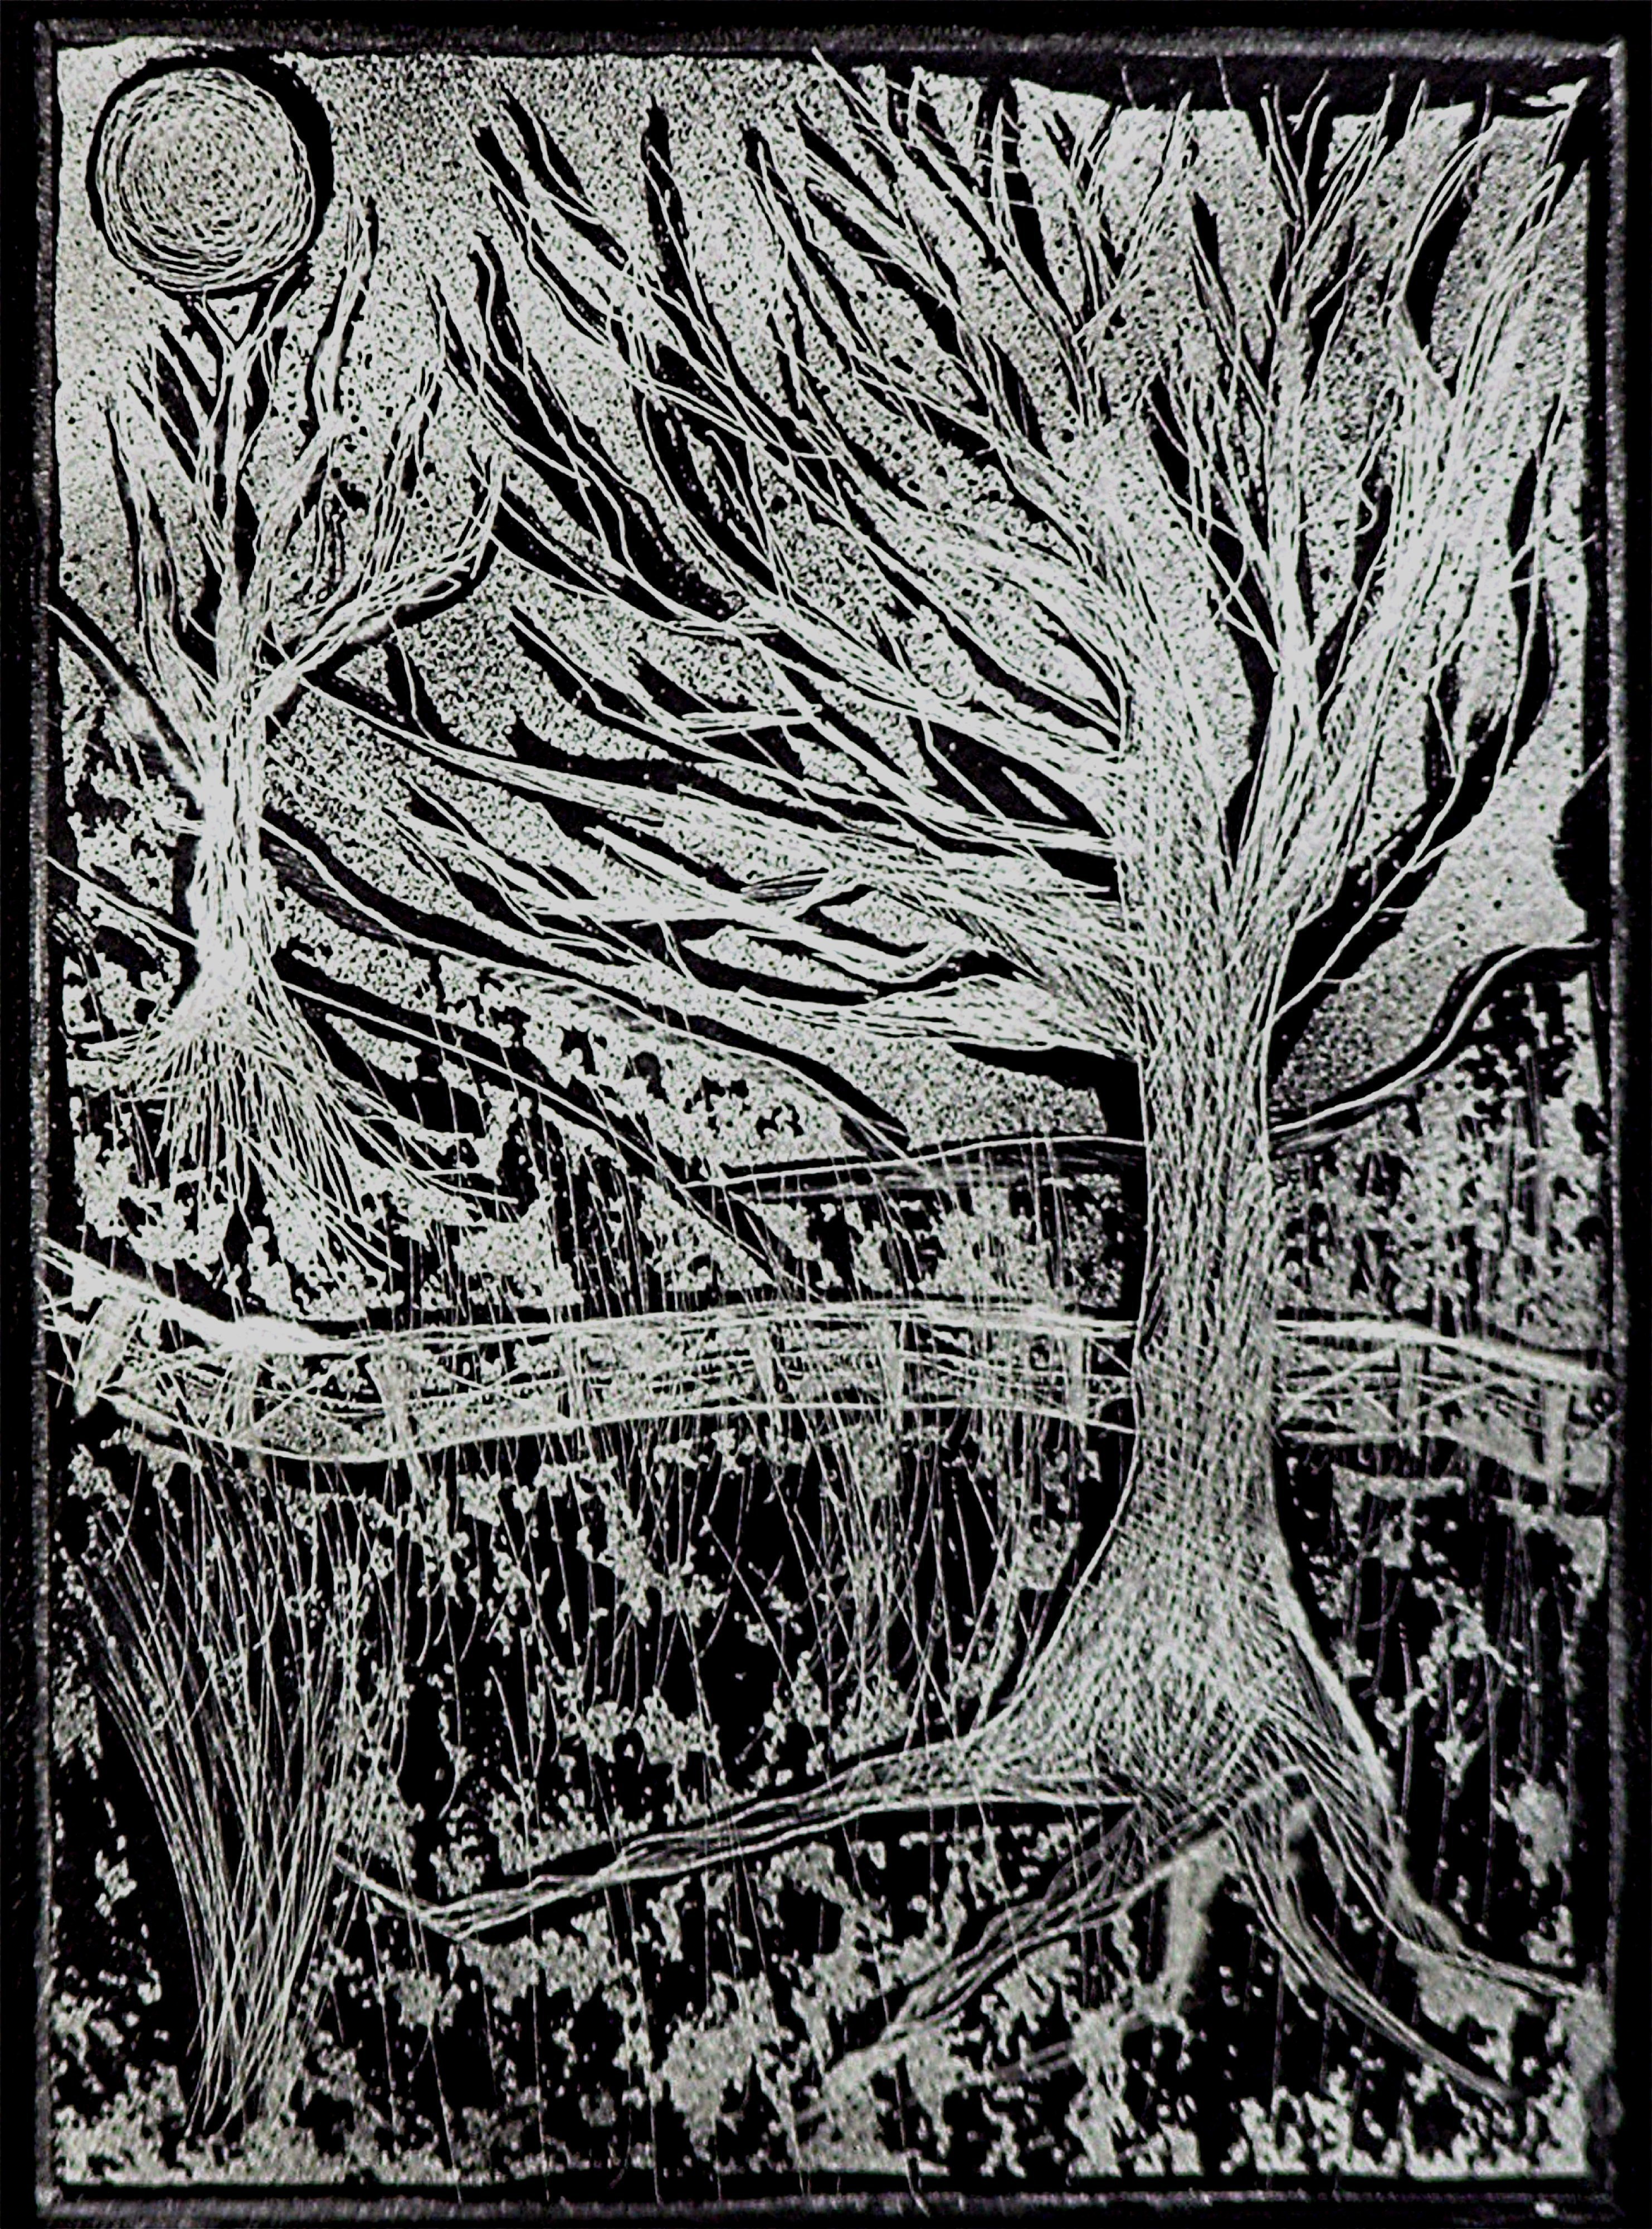 Jerry  Di Falco: 'Snow on Forbidden Drive in Silver', 2009 Etching, Landscape. I hand printed and published this edition at The Center for Works on Paper in Philadelphia, Pennsylvania, USA.  Please note that this etching is shipped to the collector as is, in other words.  .  .  without a frame or mat.  This not only keeps the price reasonable, but also allows the collector ...